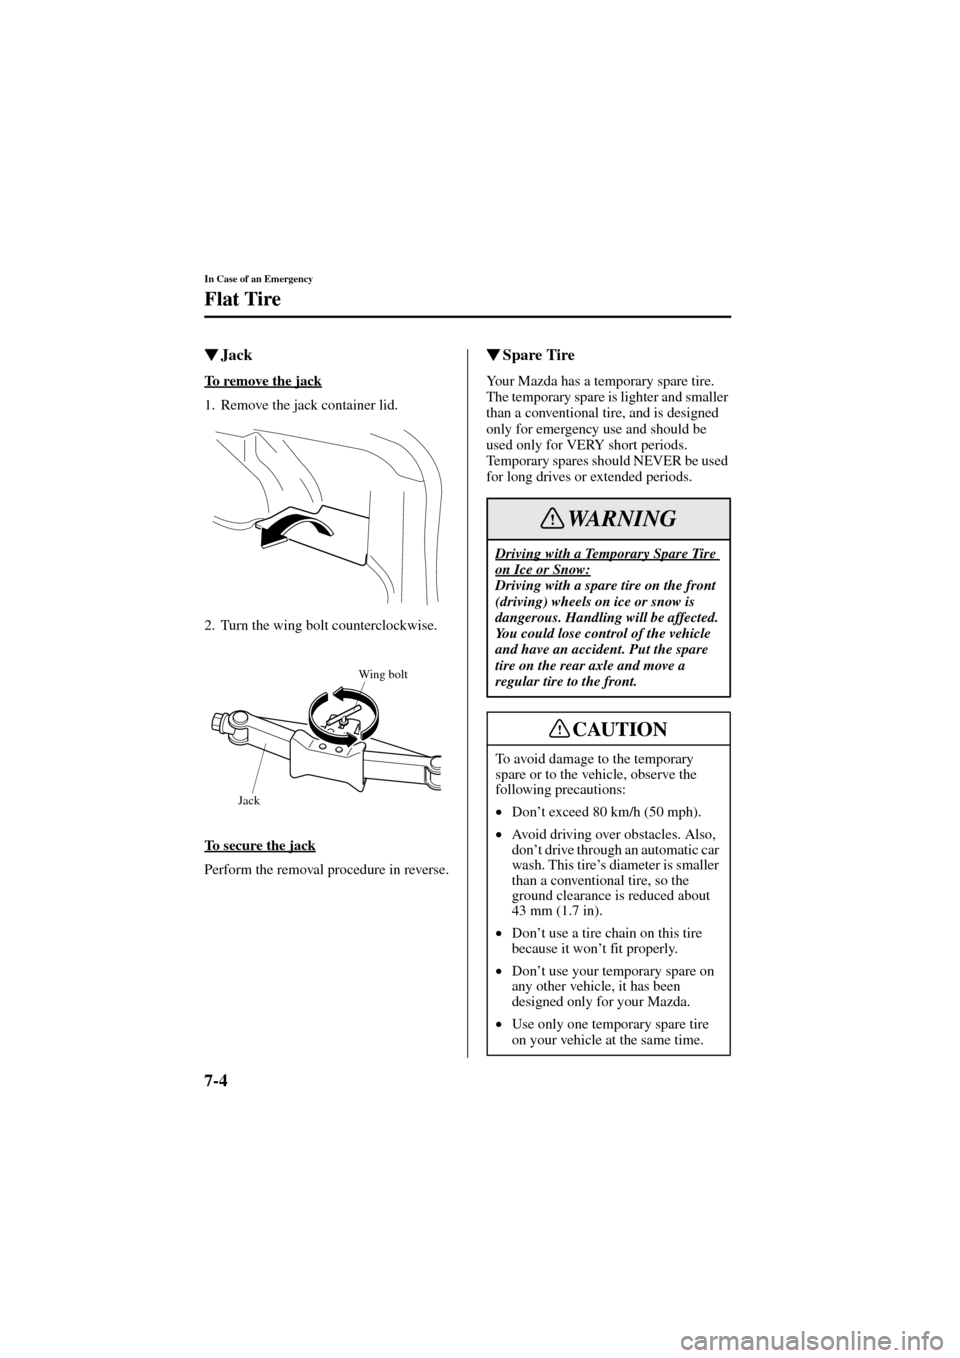 MAZDA MODEL 6 2004   (in English) Owners Manual 7-4
In Case of an Emergency
Flat Tire
Form No. 8R29-EA-02I
Jack
To remove the jack
1. Remove the jack container lid.
2. Turn the wing bolt counterclockwise.
To secure the jack
Perform the removal pro